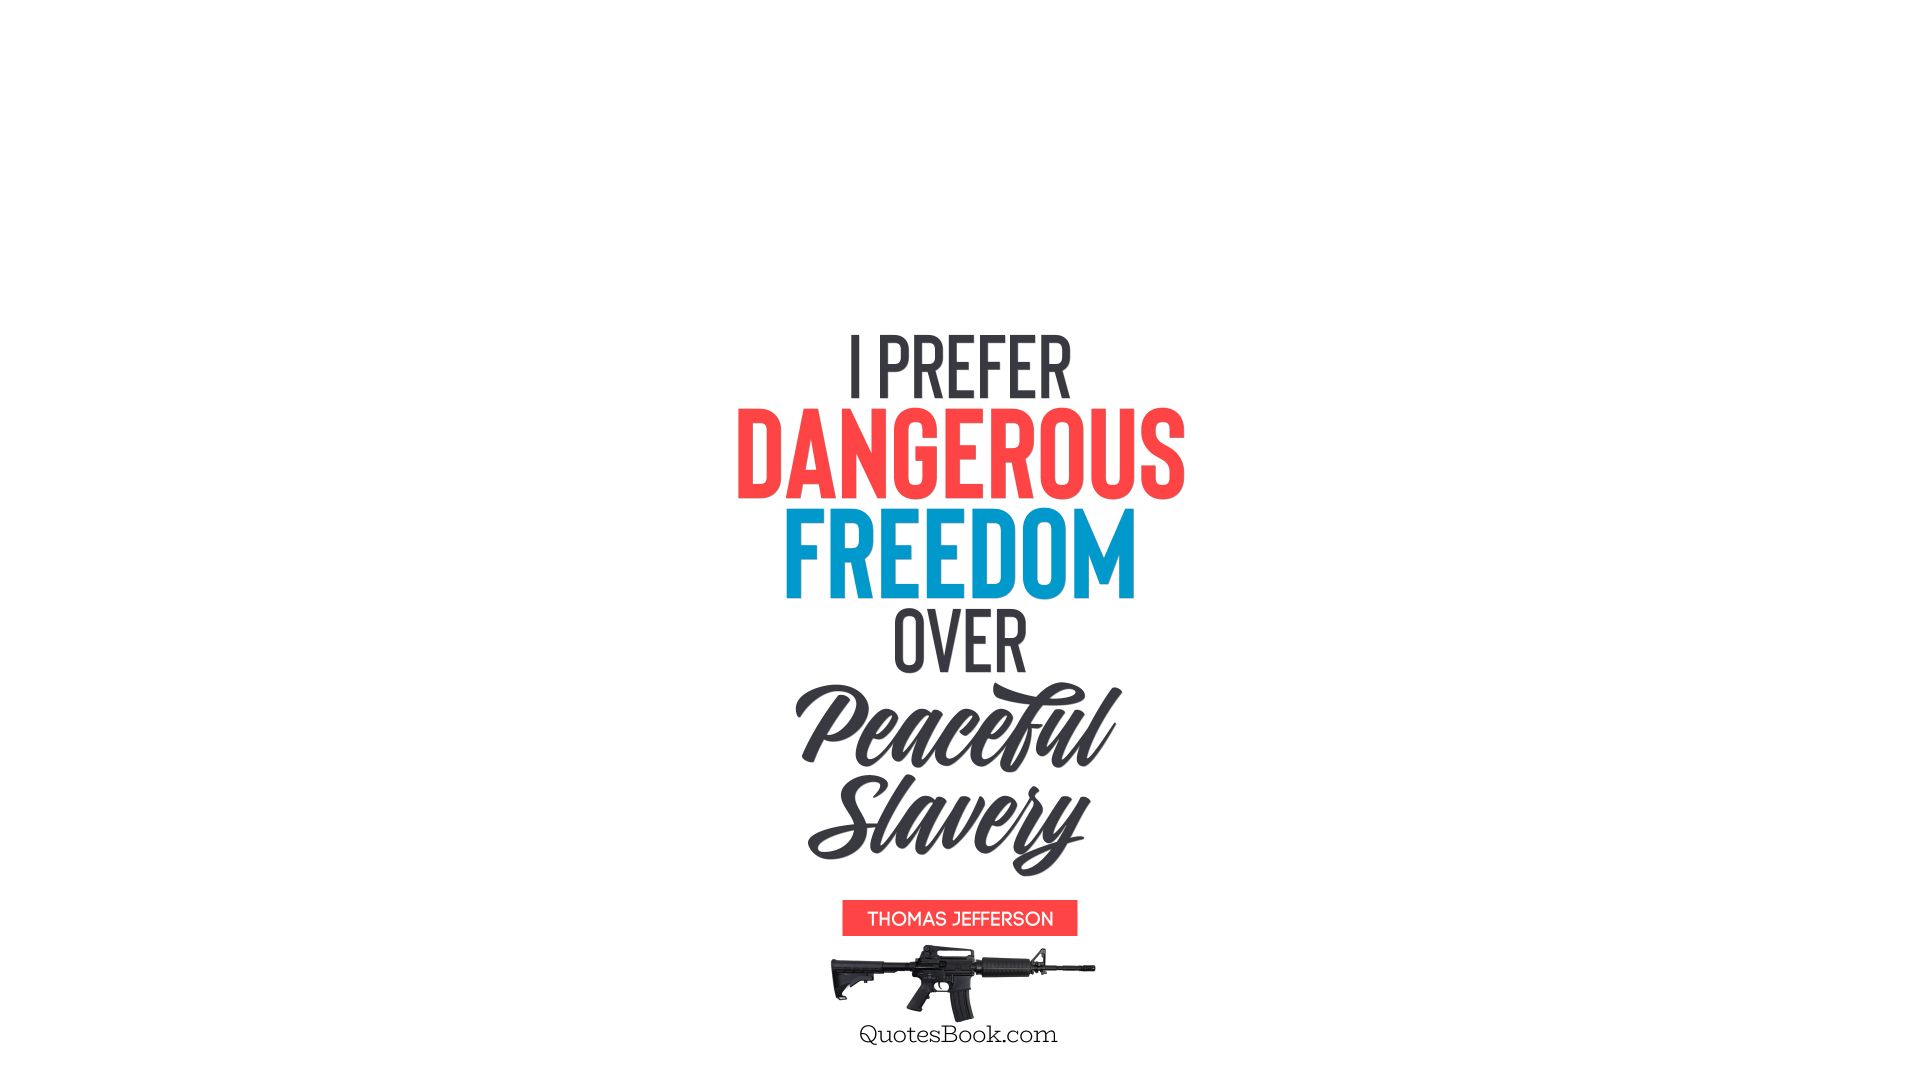 I prefer dangerous freedom over peaceful slavery. - Quote by Thomas Jefferson 